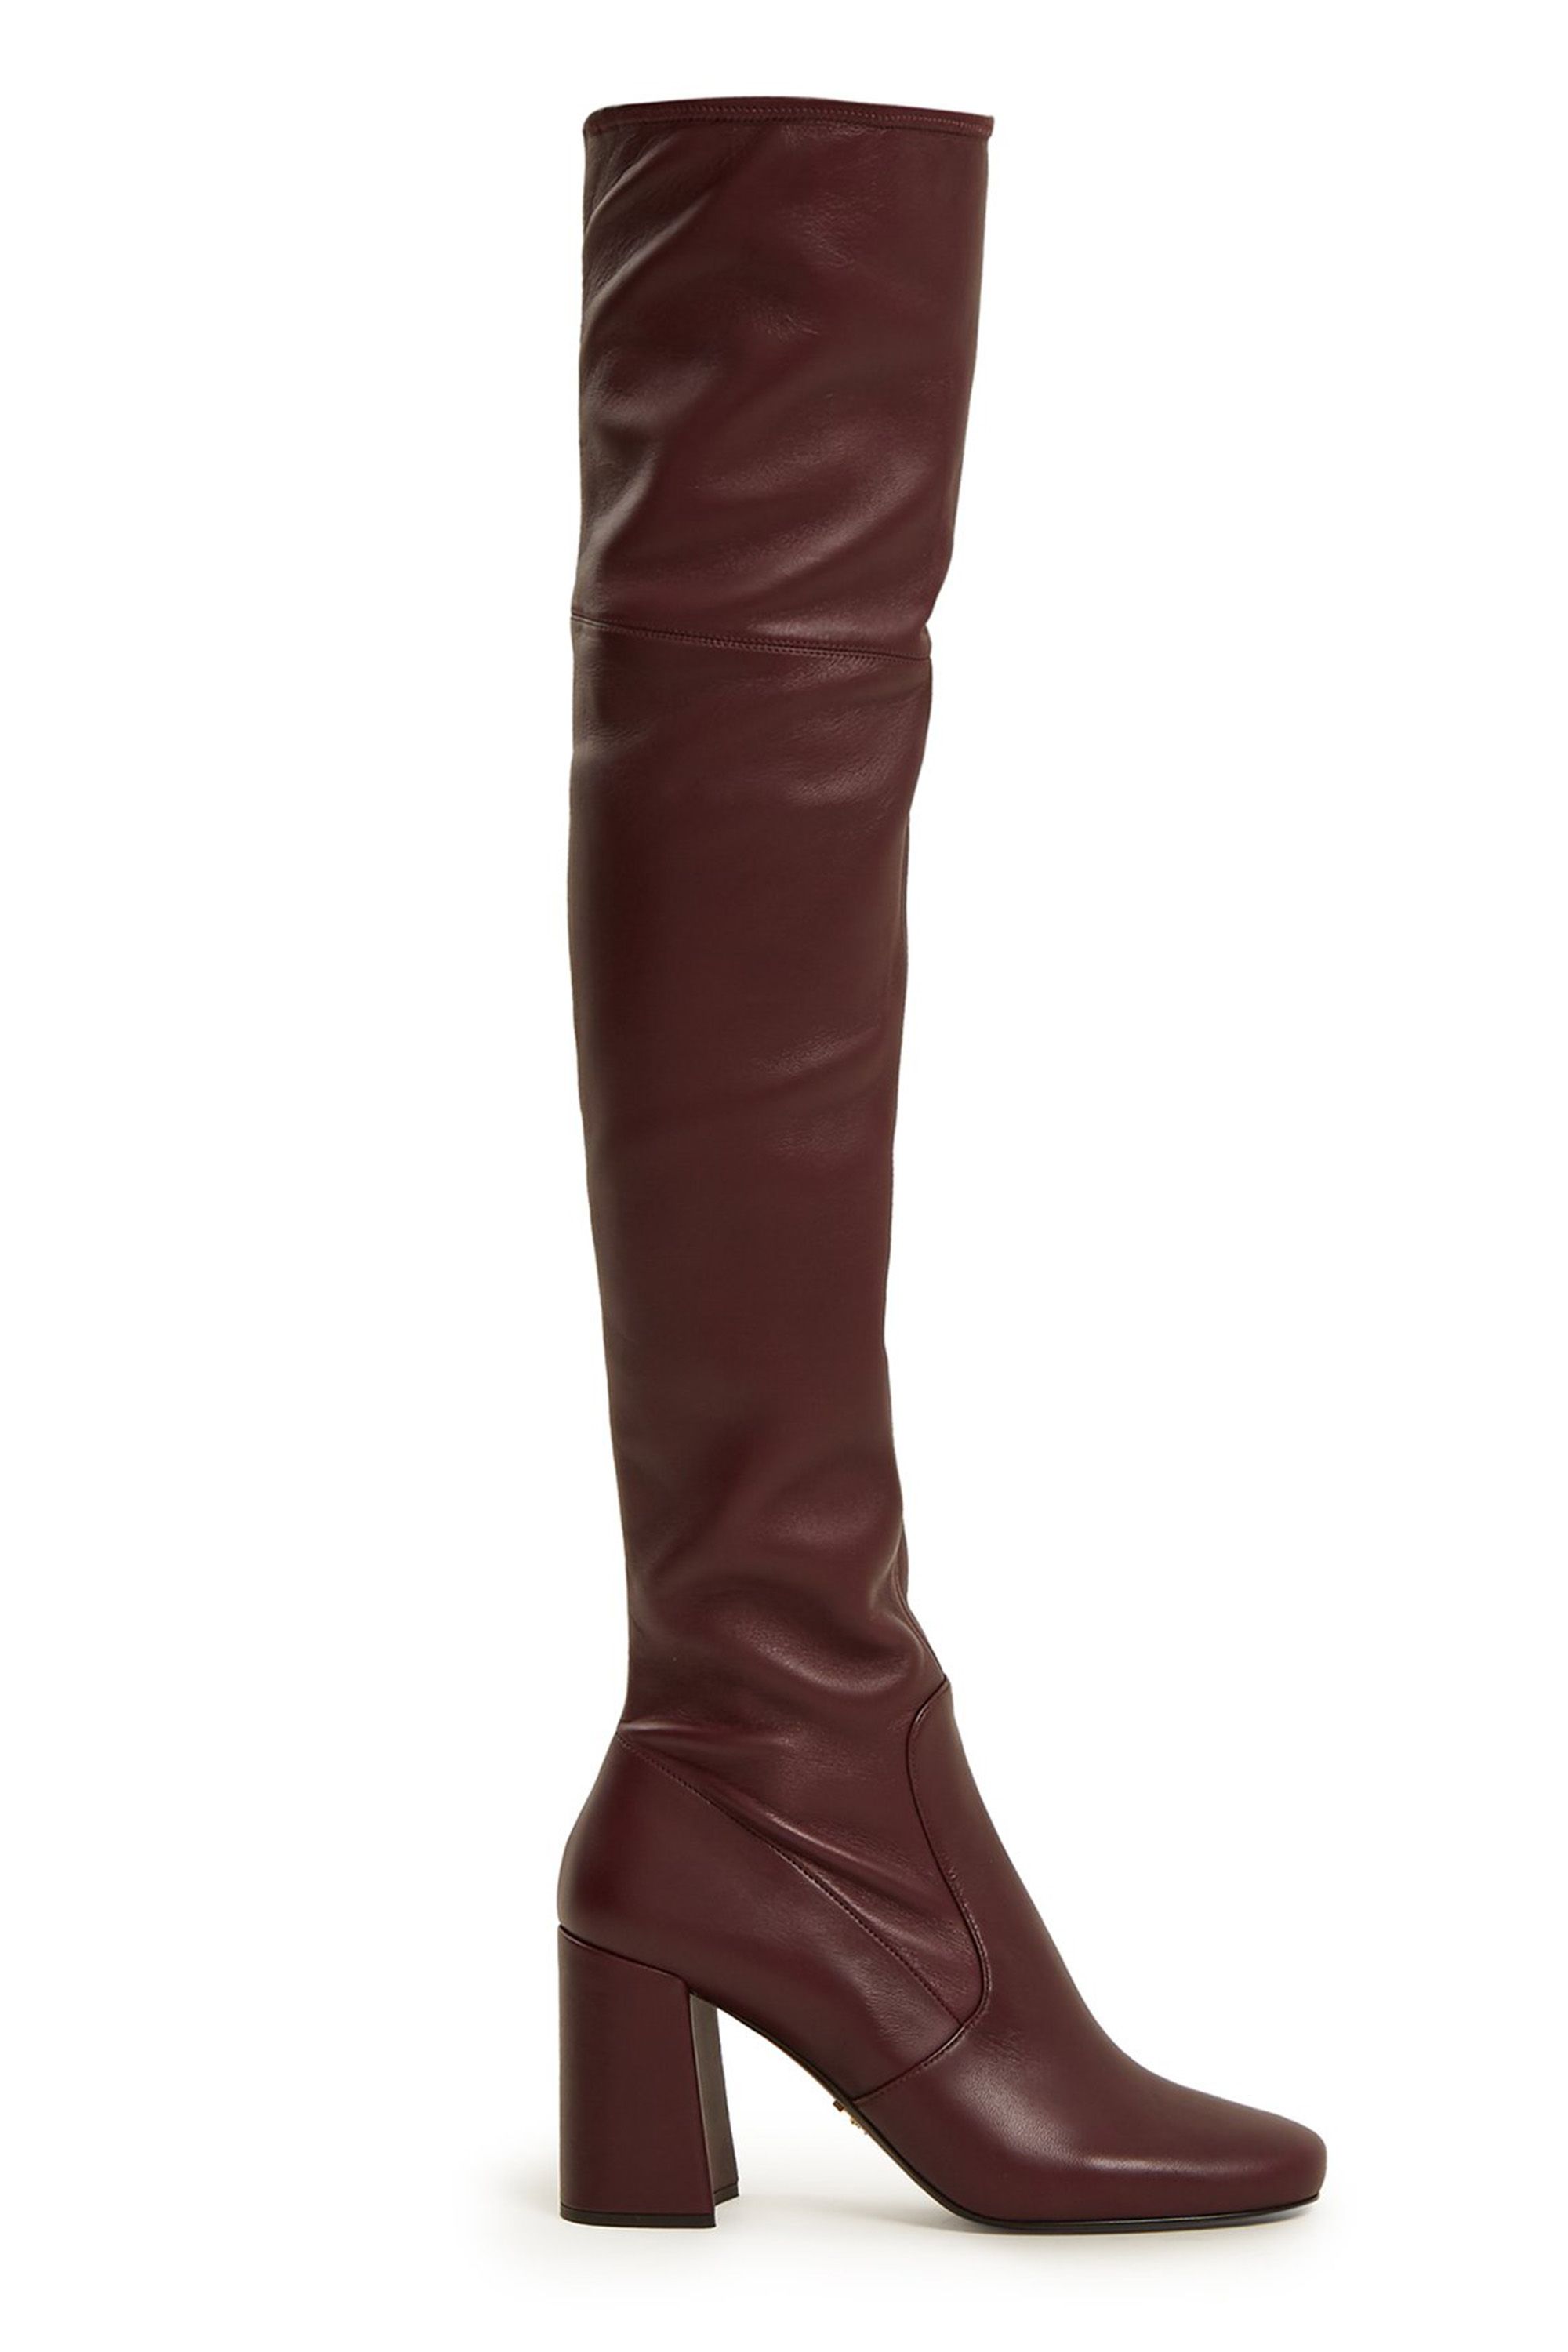 Best over-the-knee boots | Best thigh 